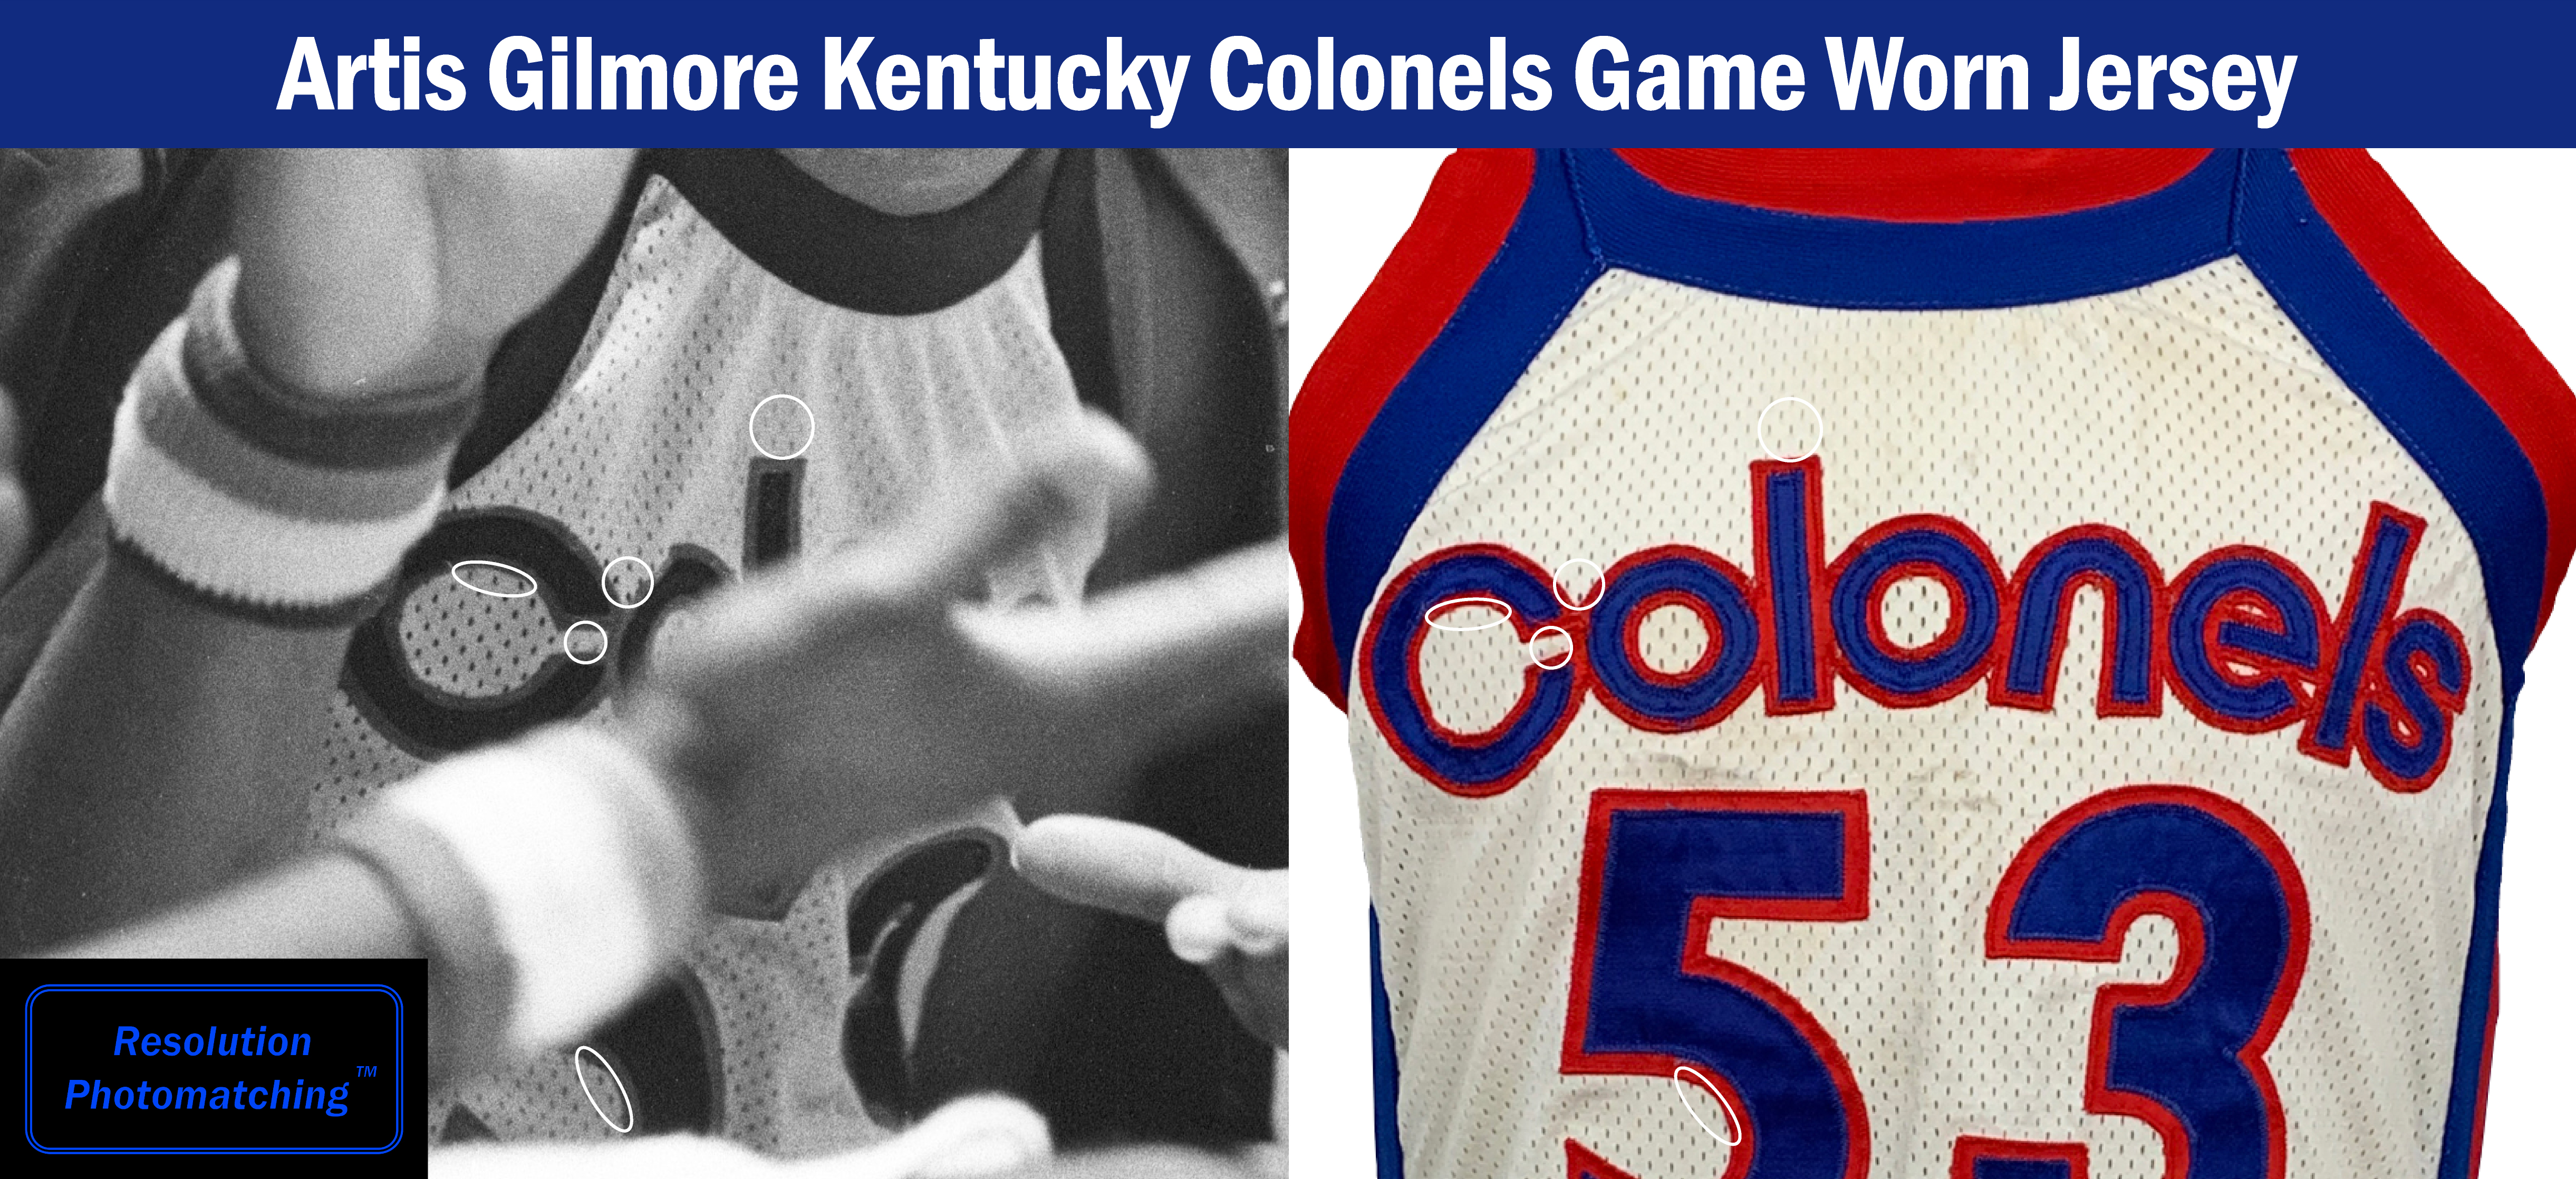 Kentucky Colonels Artis Gilmore Signed Blue Throwback Jersey w/72